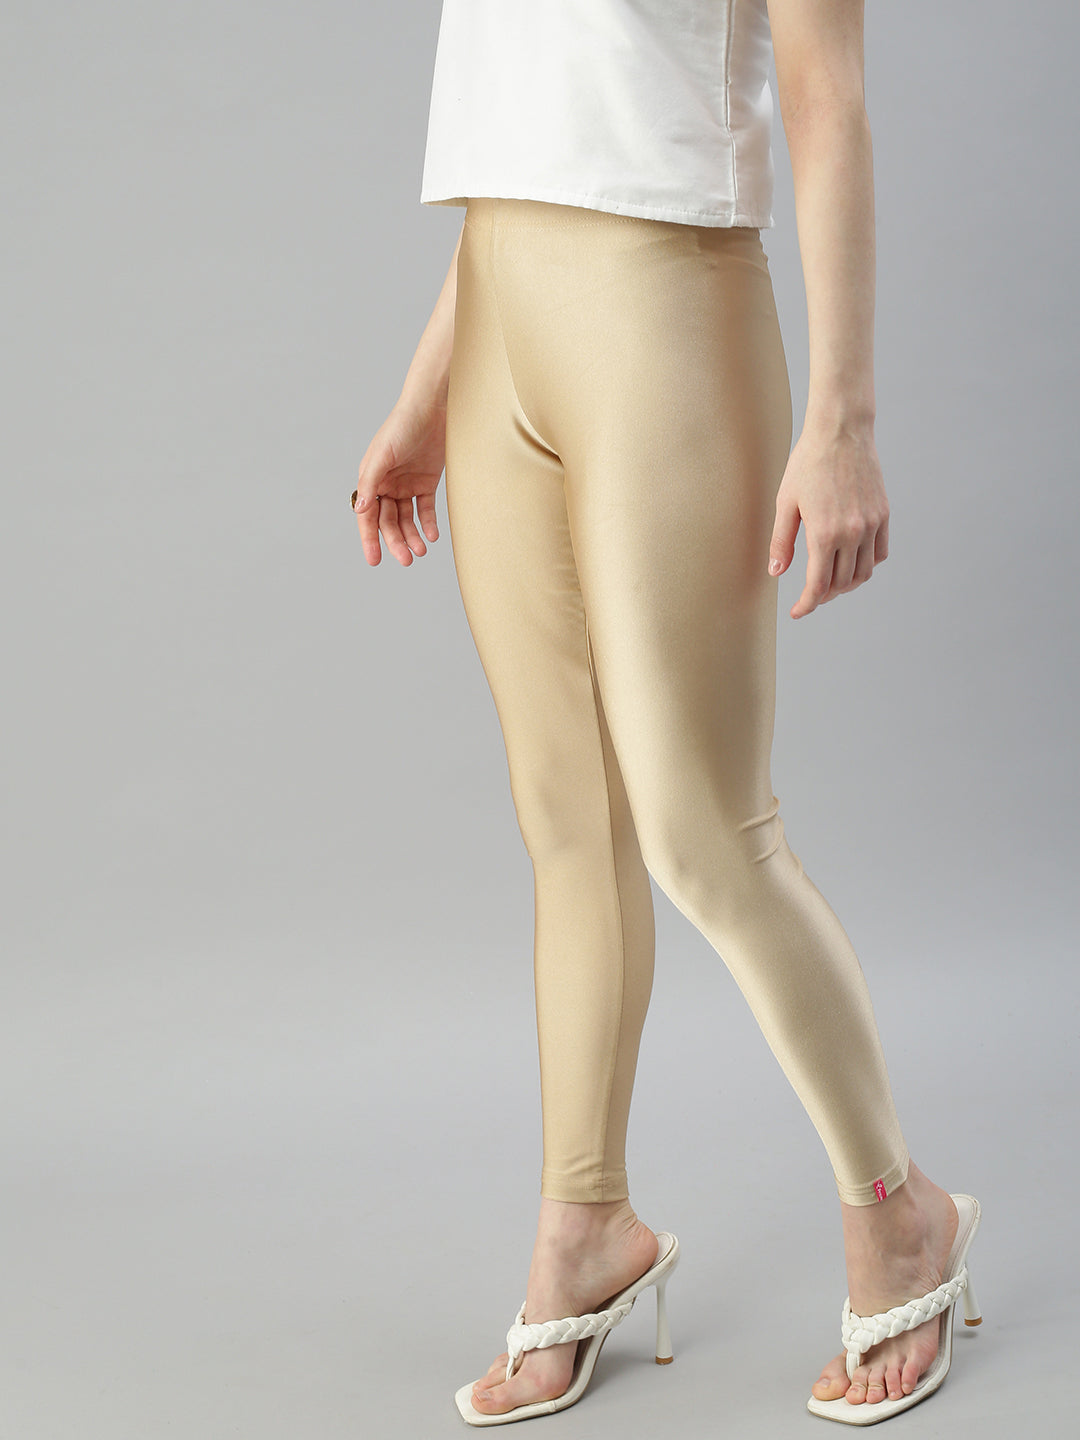 Stay comfortable yet stand out in any traditional look with our Shimmer  Leggings #shorts - YouTube